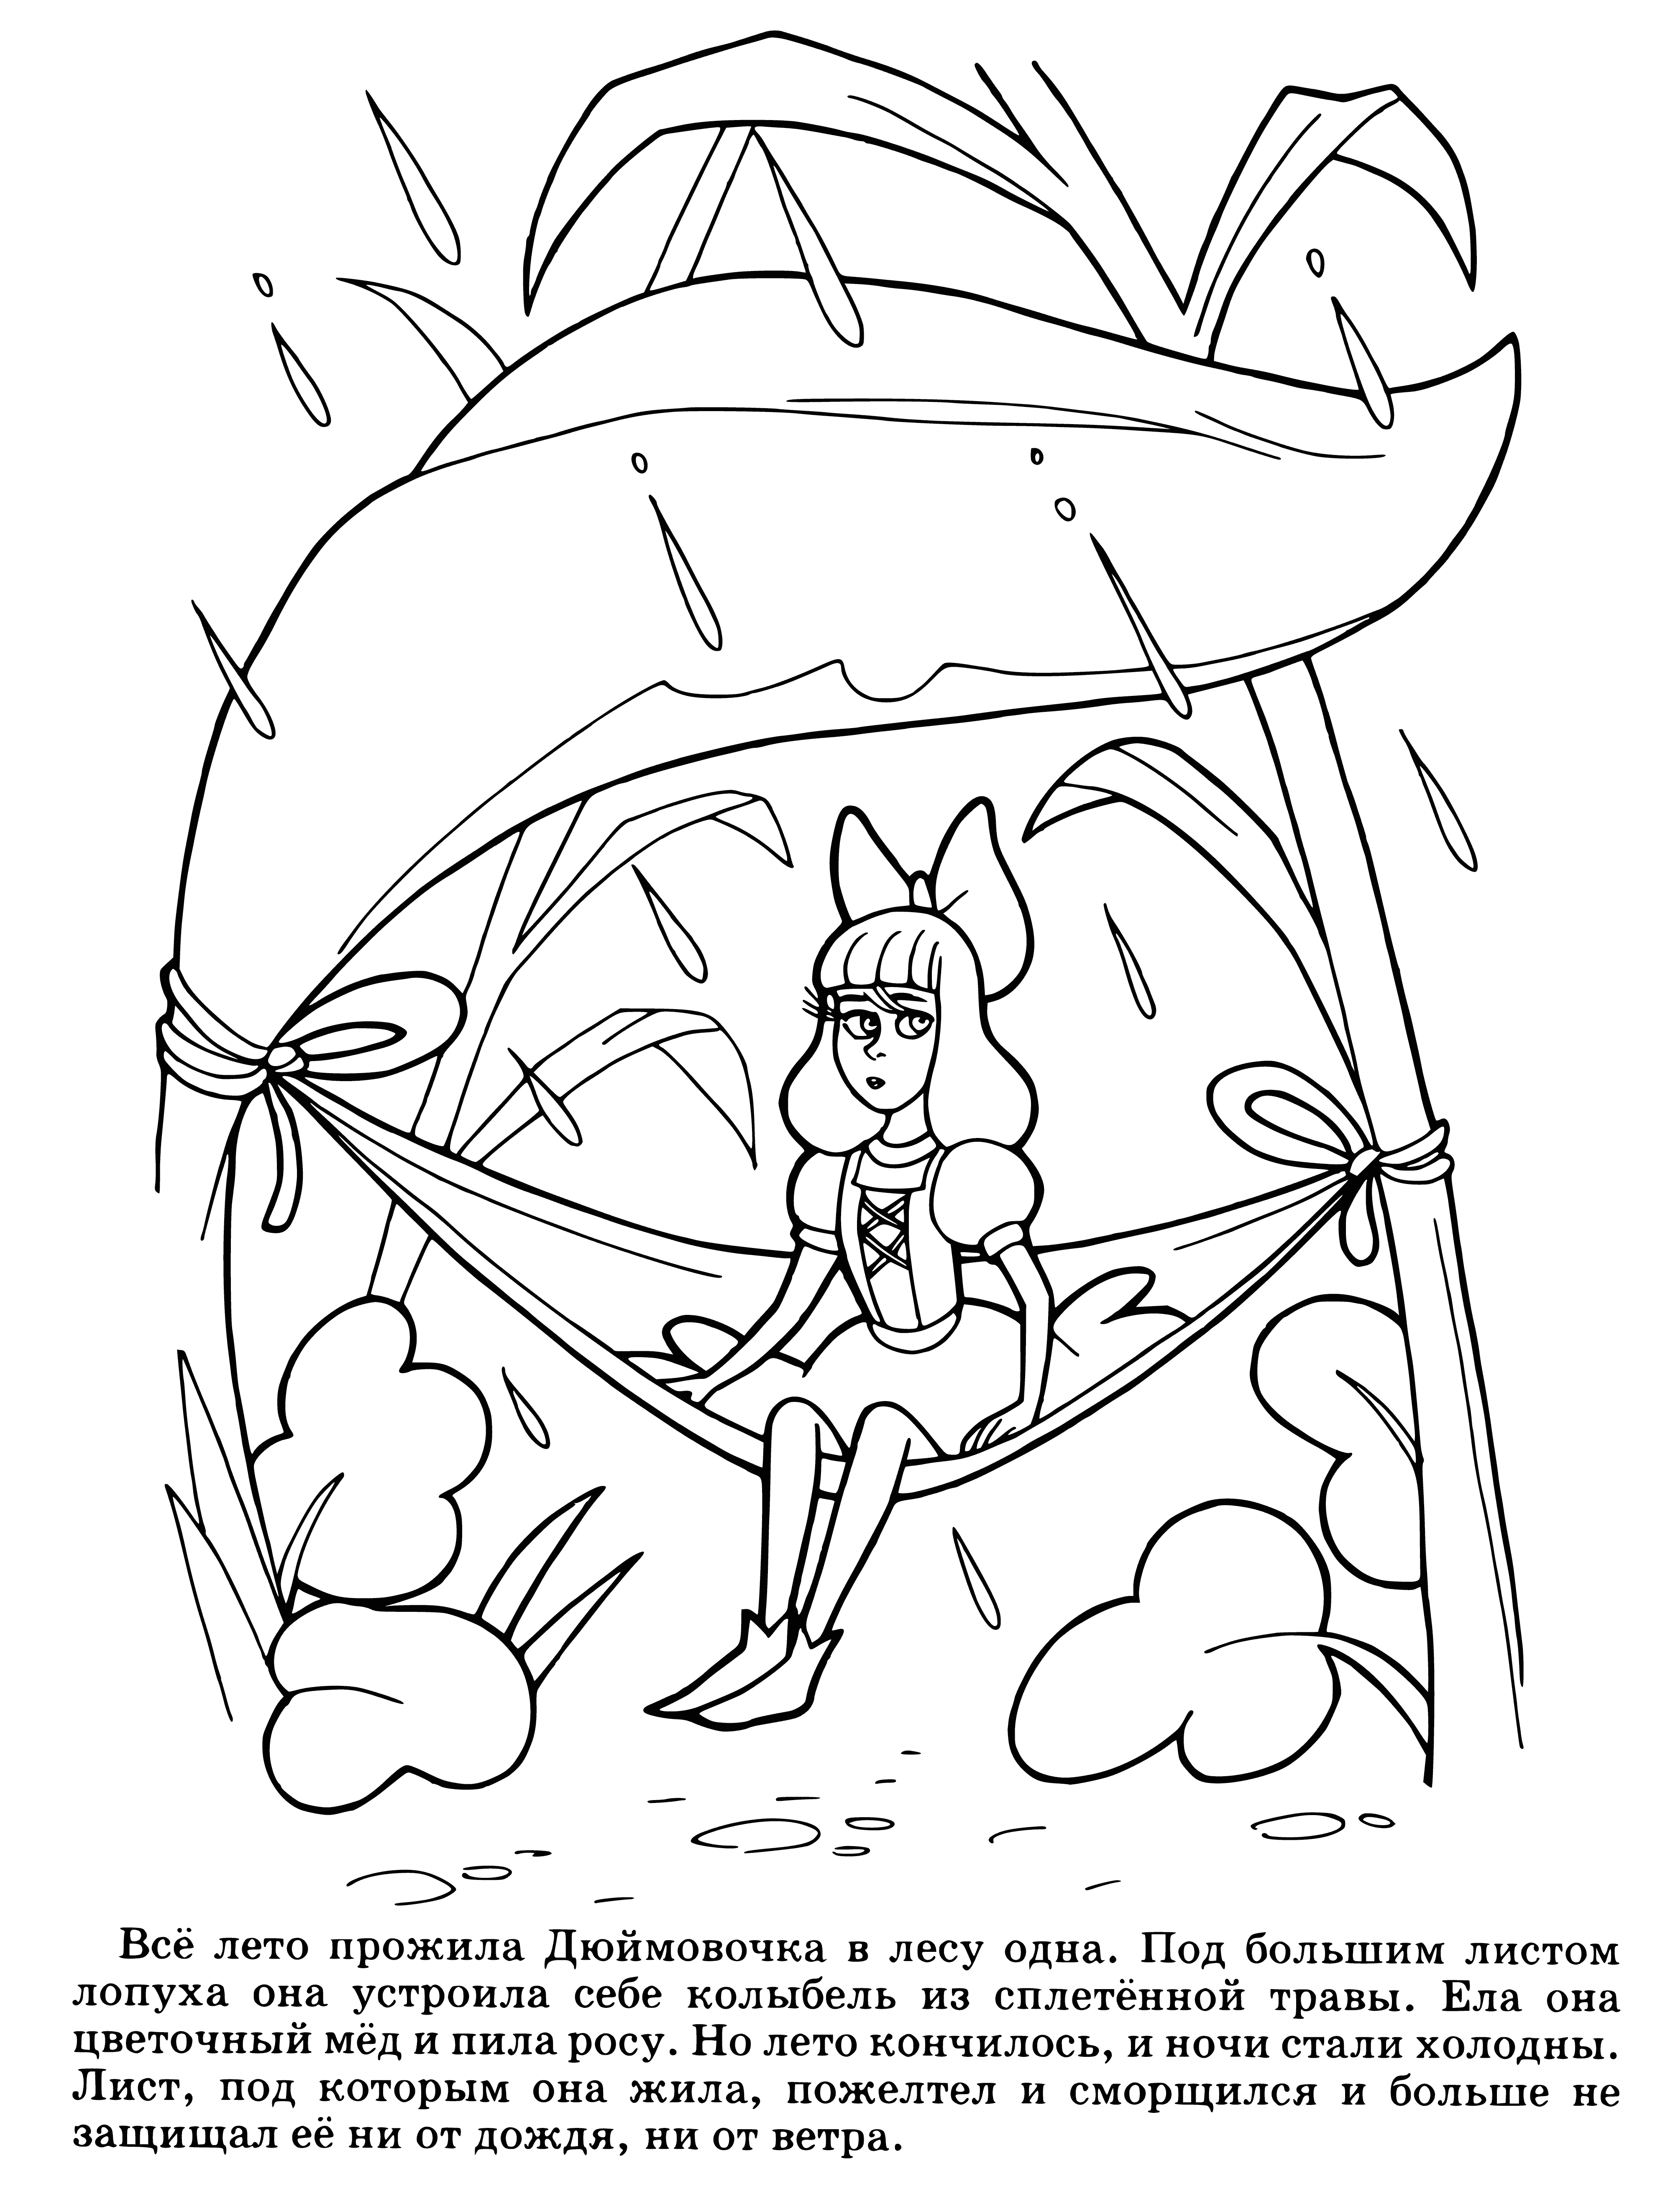 coloring page: Girl sleeps in bed made of white sheet, holding The Tales of Hans Christian Andersen - Thumbelina.